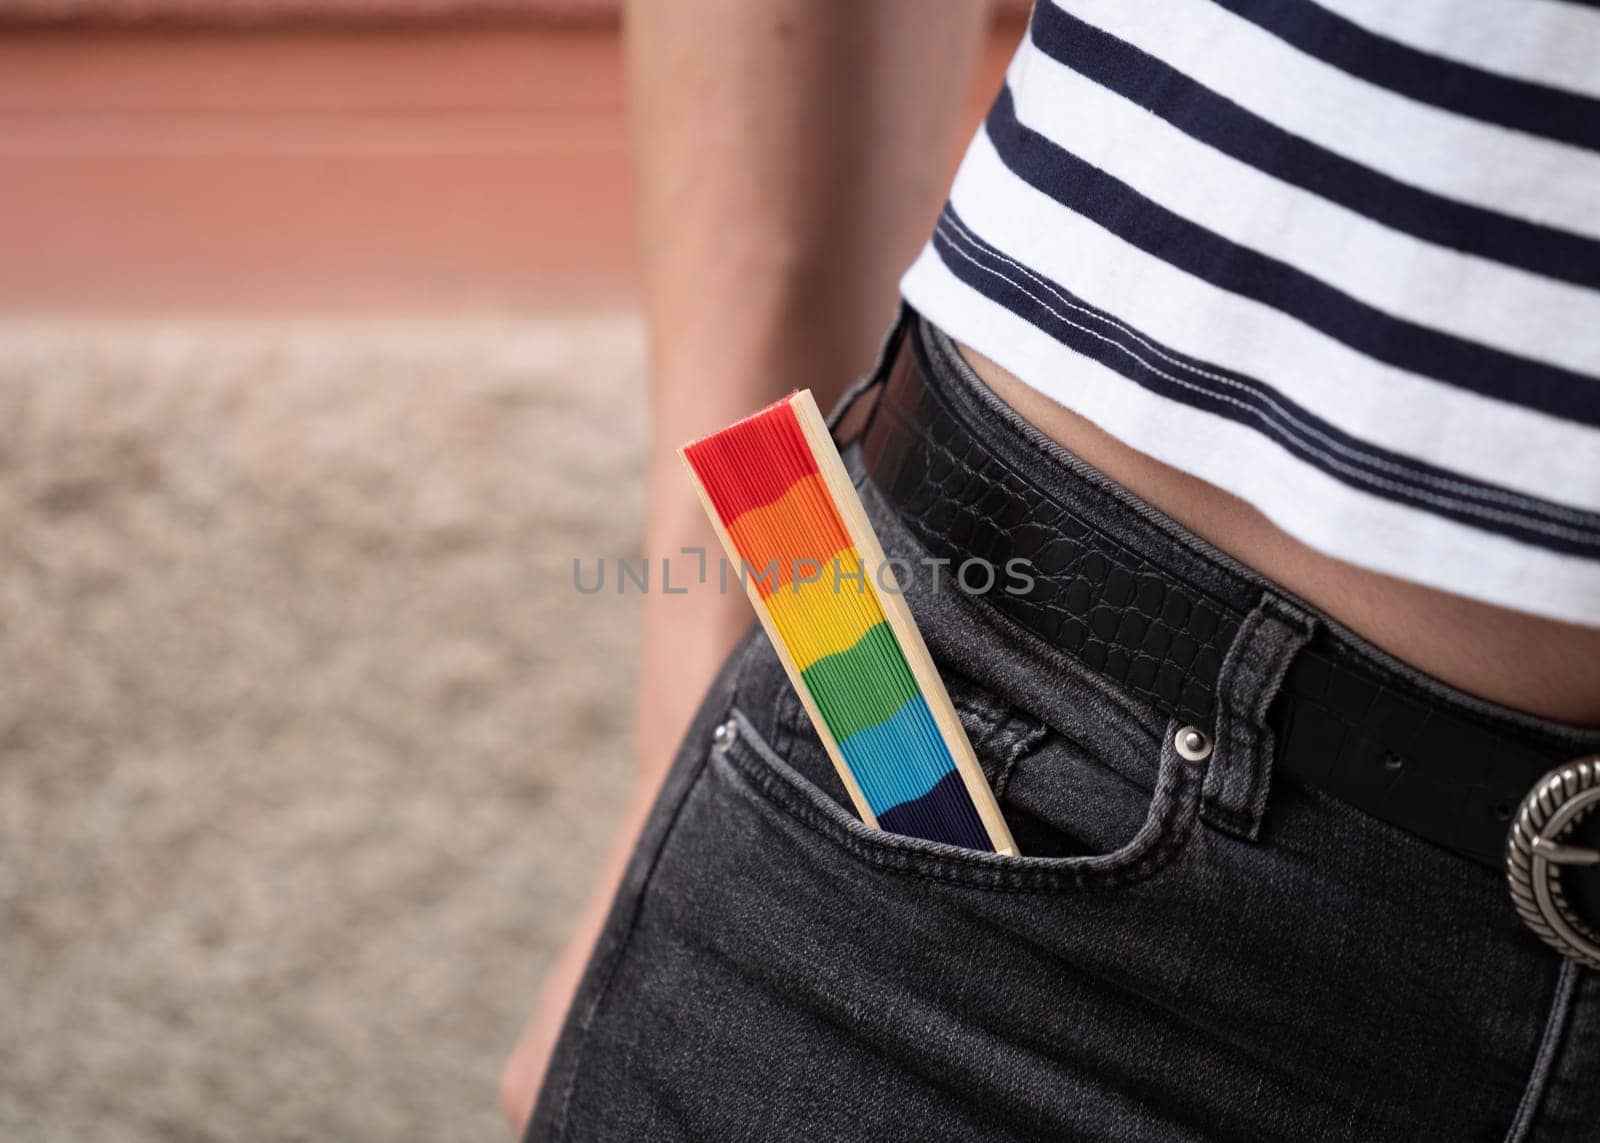 Close up view of a gay person holding a rainbow colored spanish fan in the pocket as a sign to support LGBTQ community.